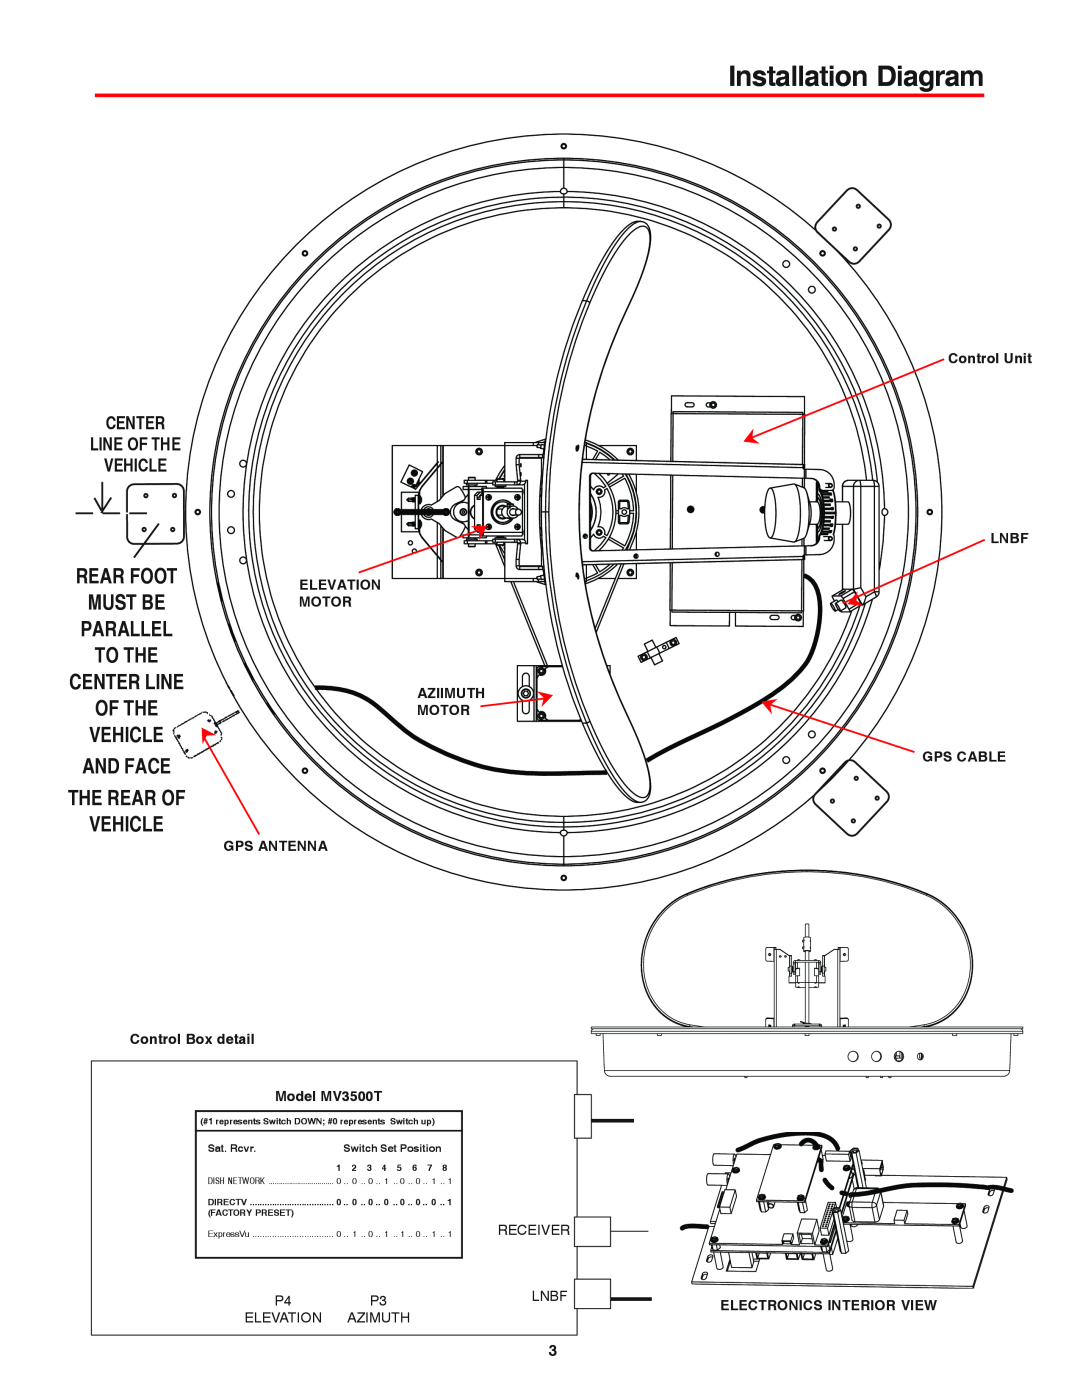 Winegard MVT-35W Installation Diagram, Parallel, Center Line Of The Vehicle, Rear Foot, Must Be, To The, And Face 